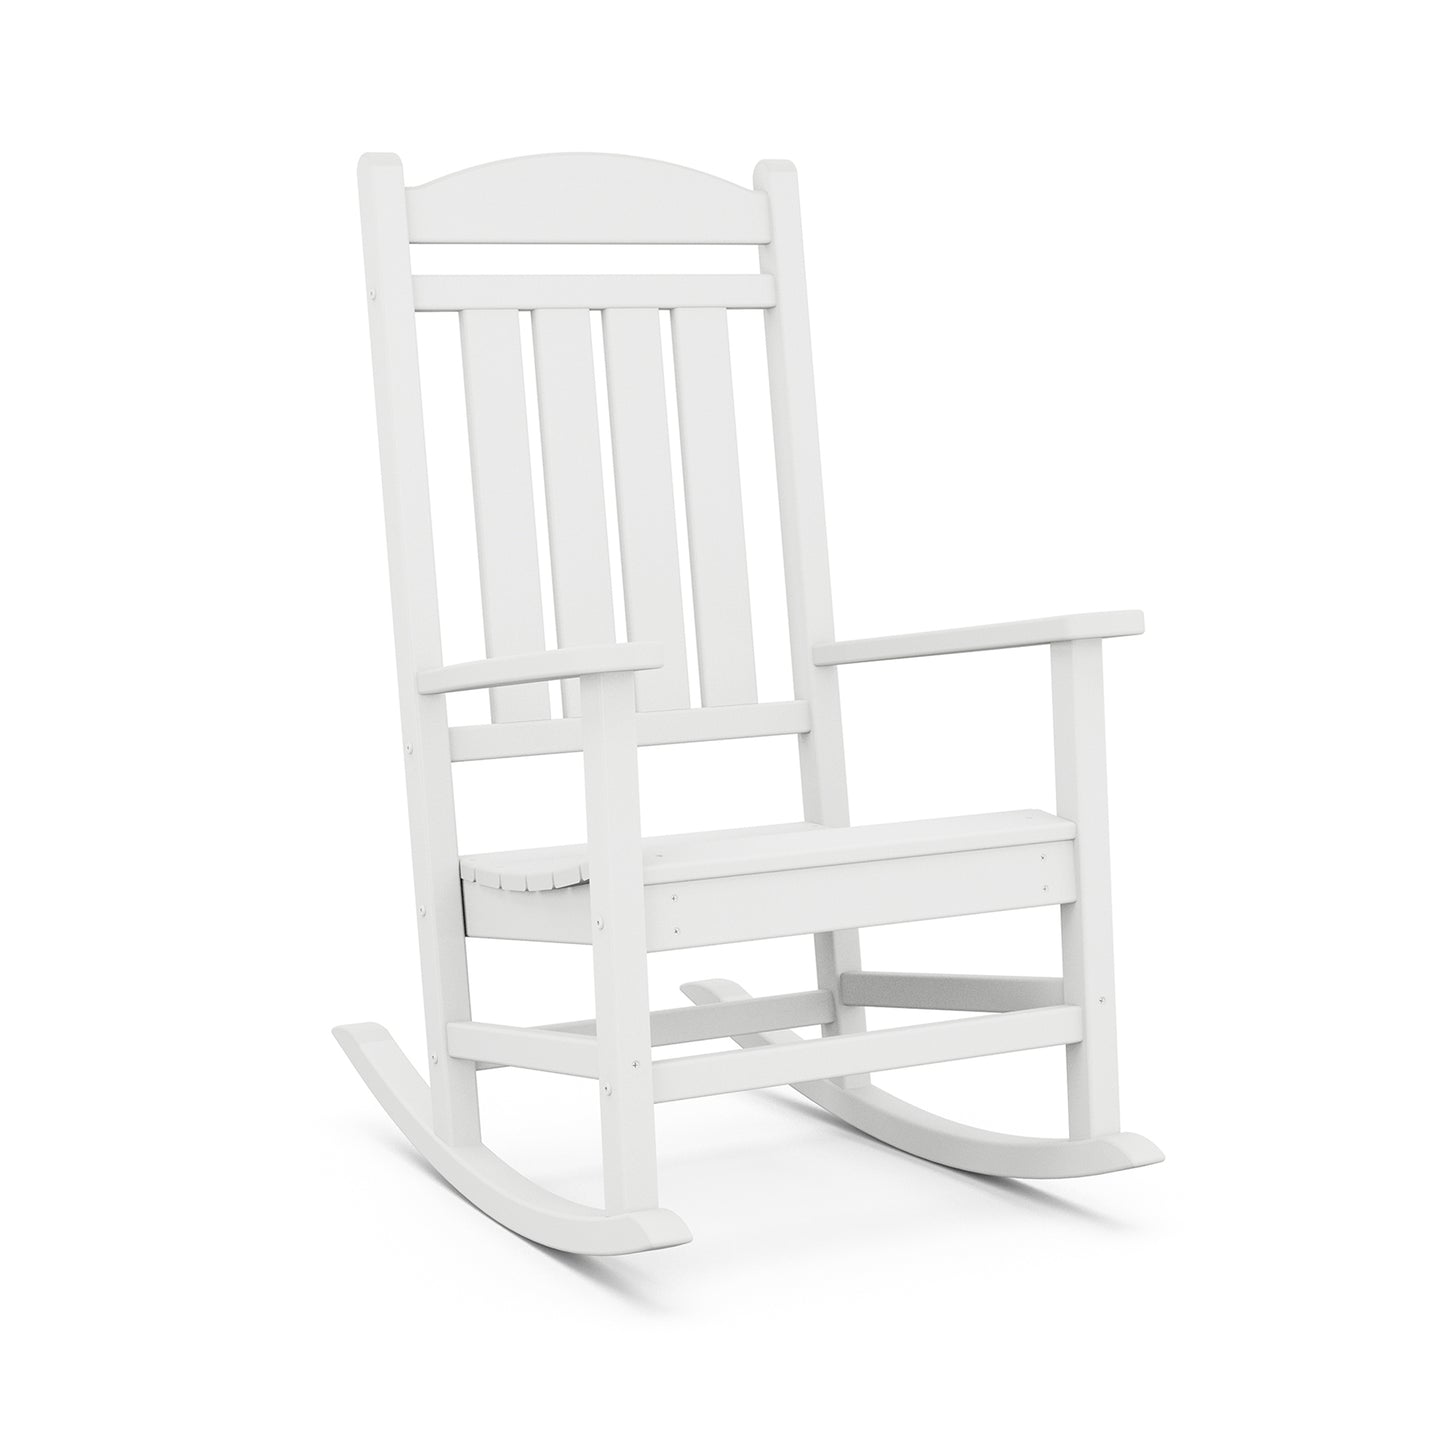 A white POLYWOOD© Presidential Outdoor Rocking Chair isolated on a white background. The chair features a high back with vertical slats and a flat seat, suitable for relaxed seating.